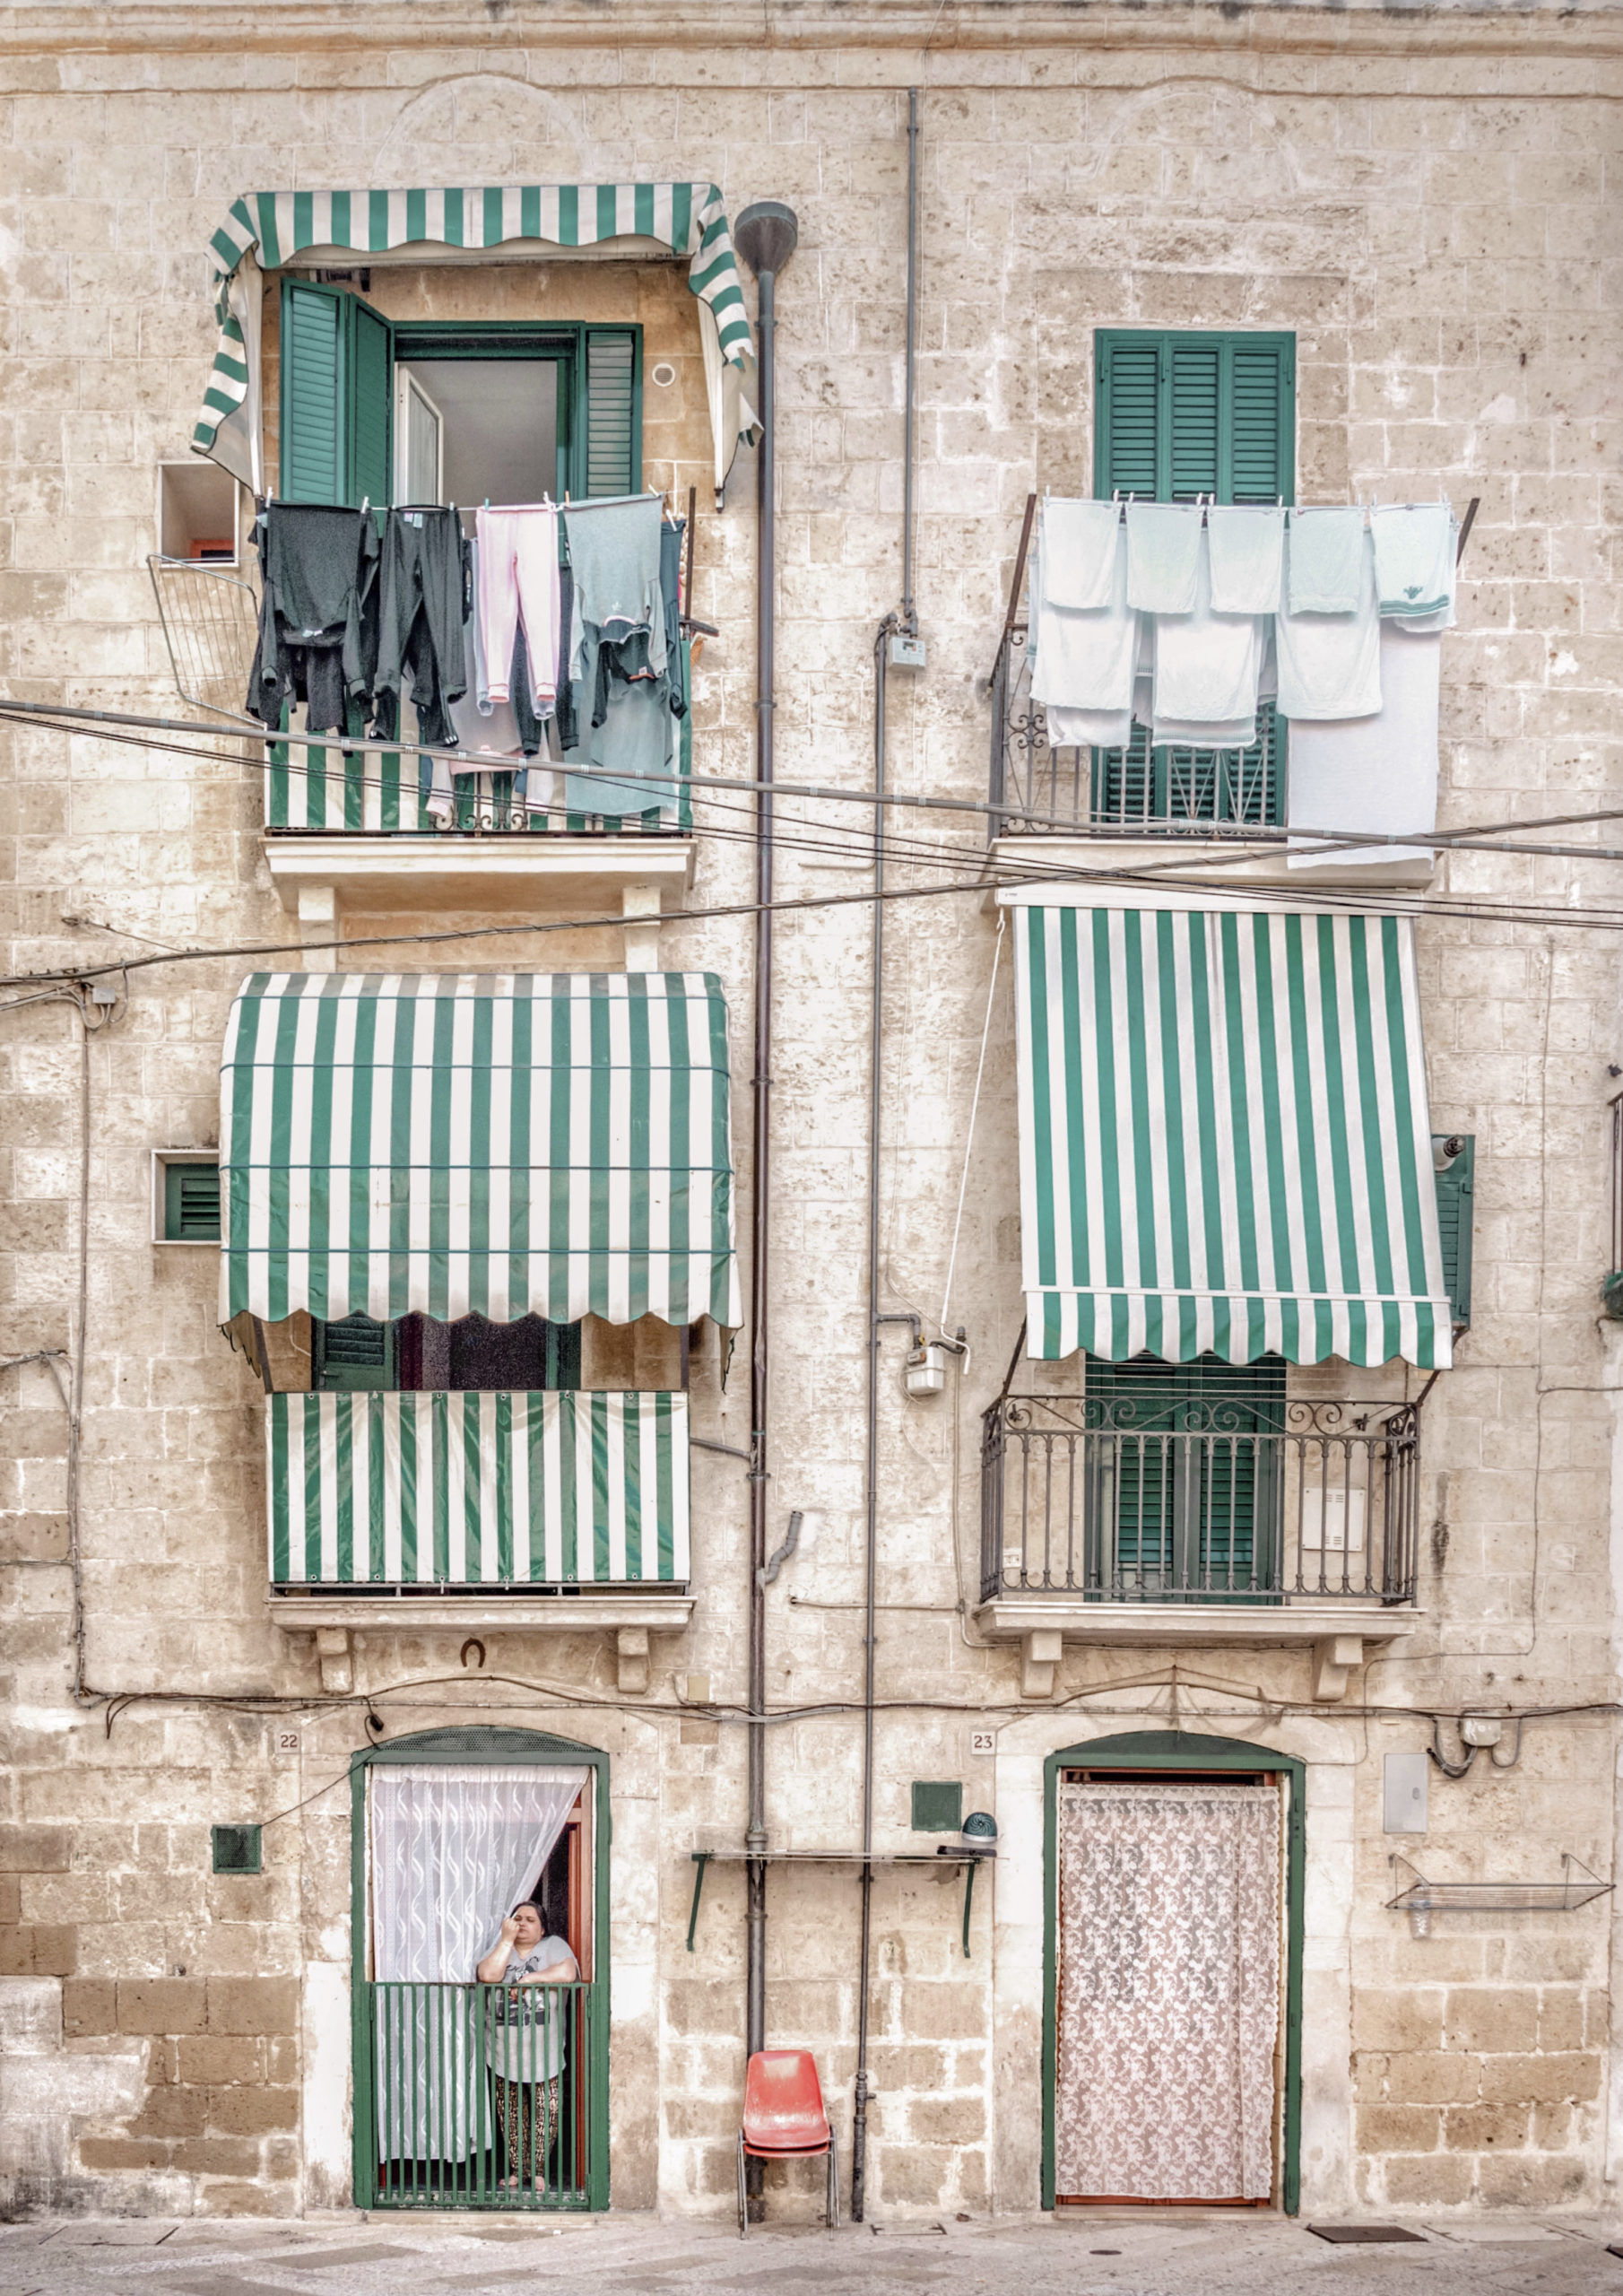 Lecce - Romantic European cities photography by Giulia CREMONESE